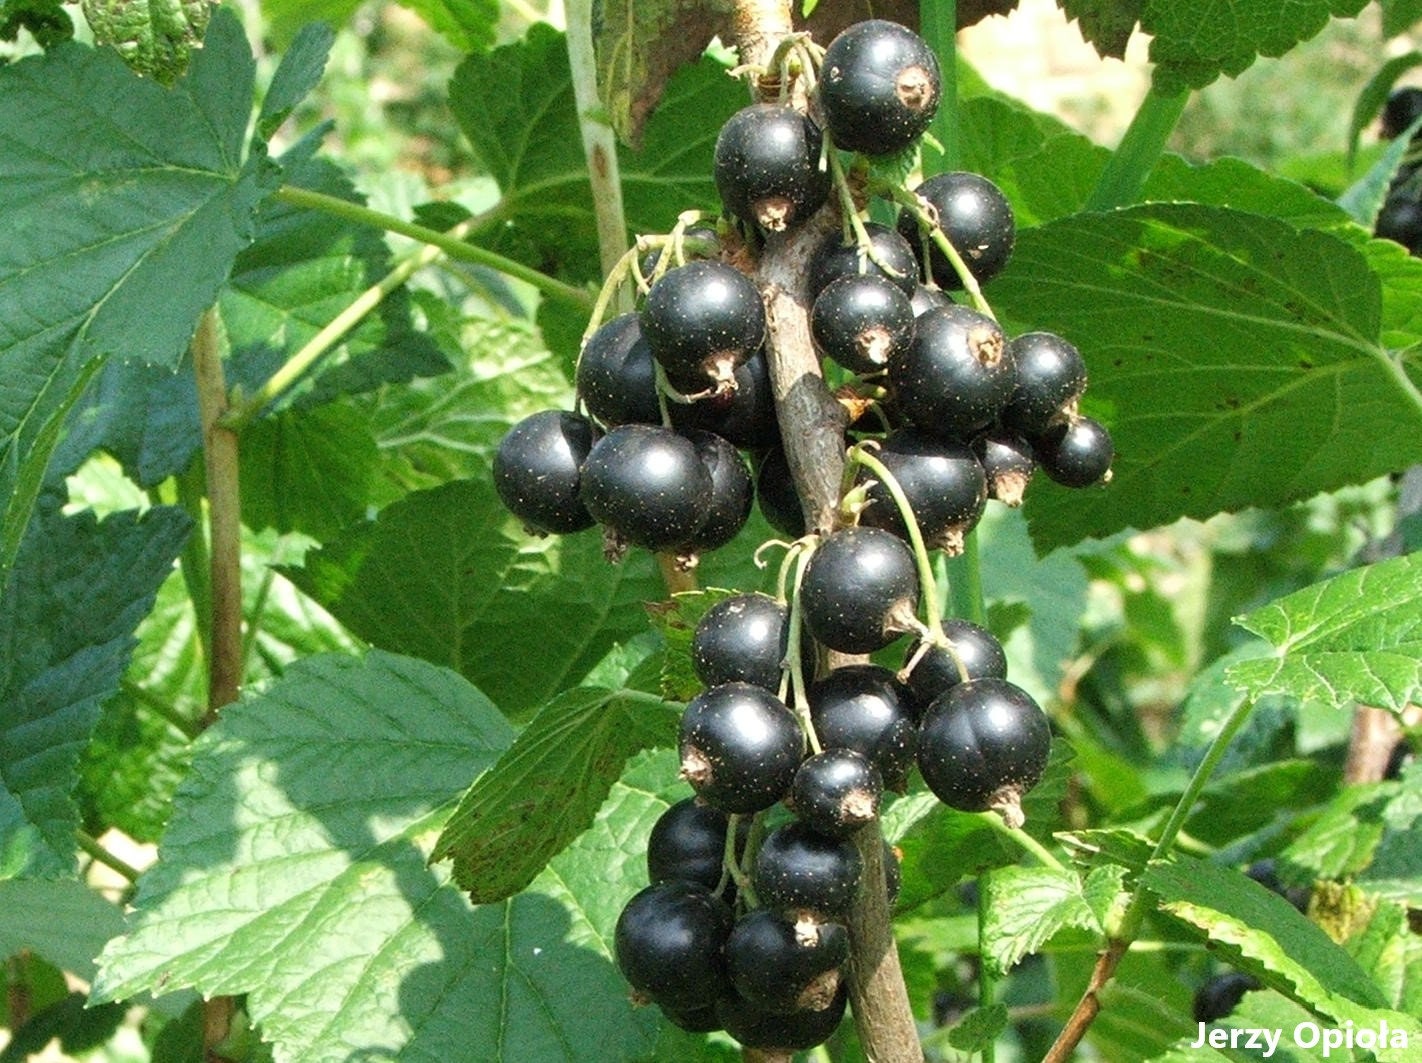 Black Currant - Ribes Nigrum - 50 Seeds - Cassis Healthy Fruit - For Jams, Preserves & Syrups